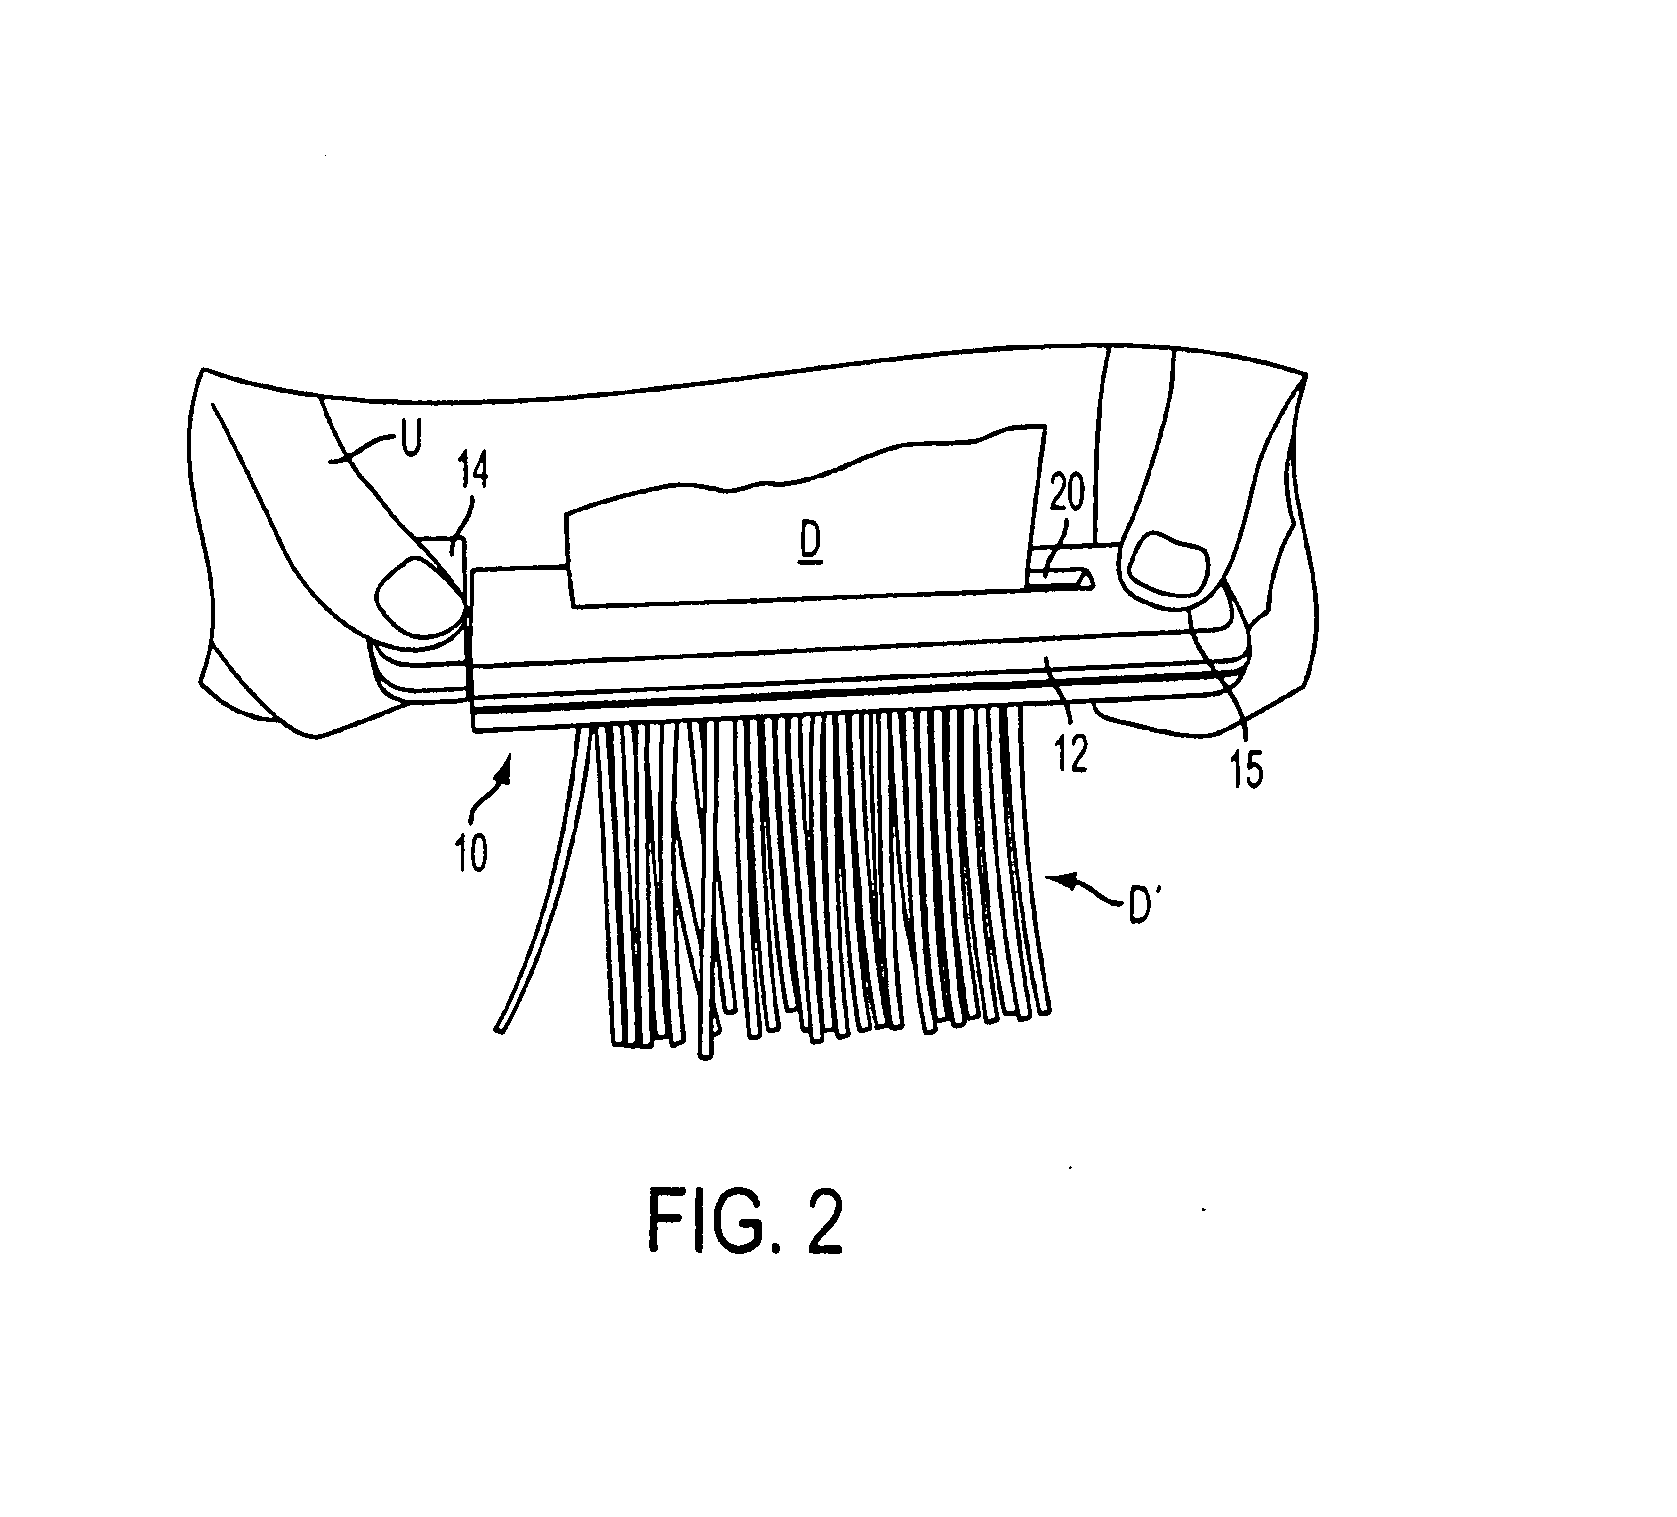 Hand-held shredding device for paper or the like